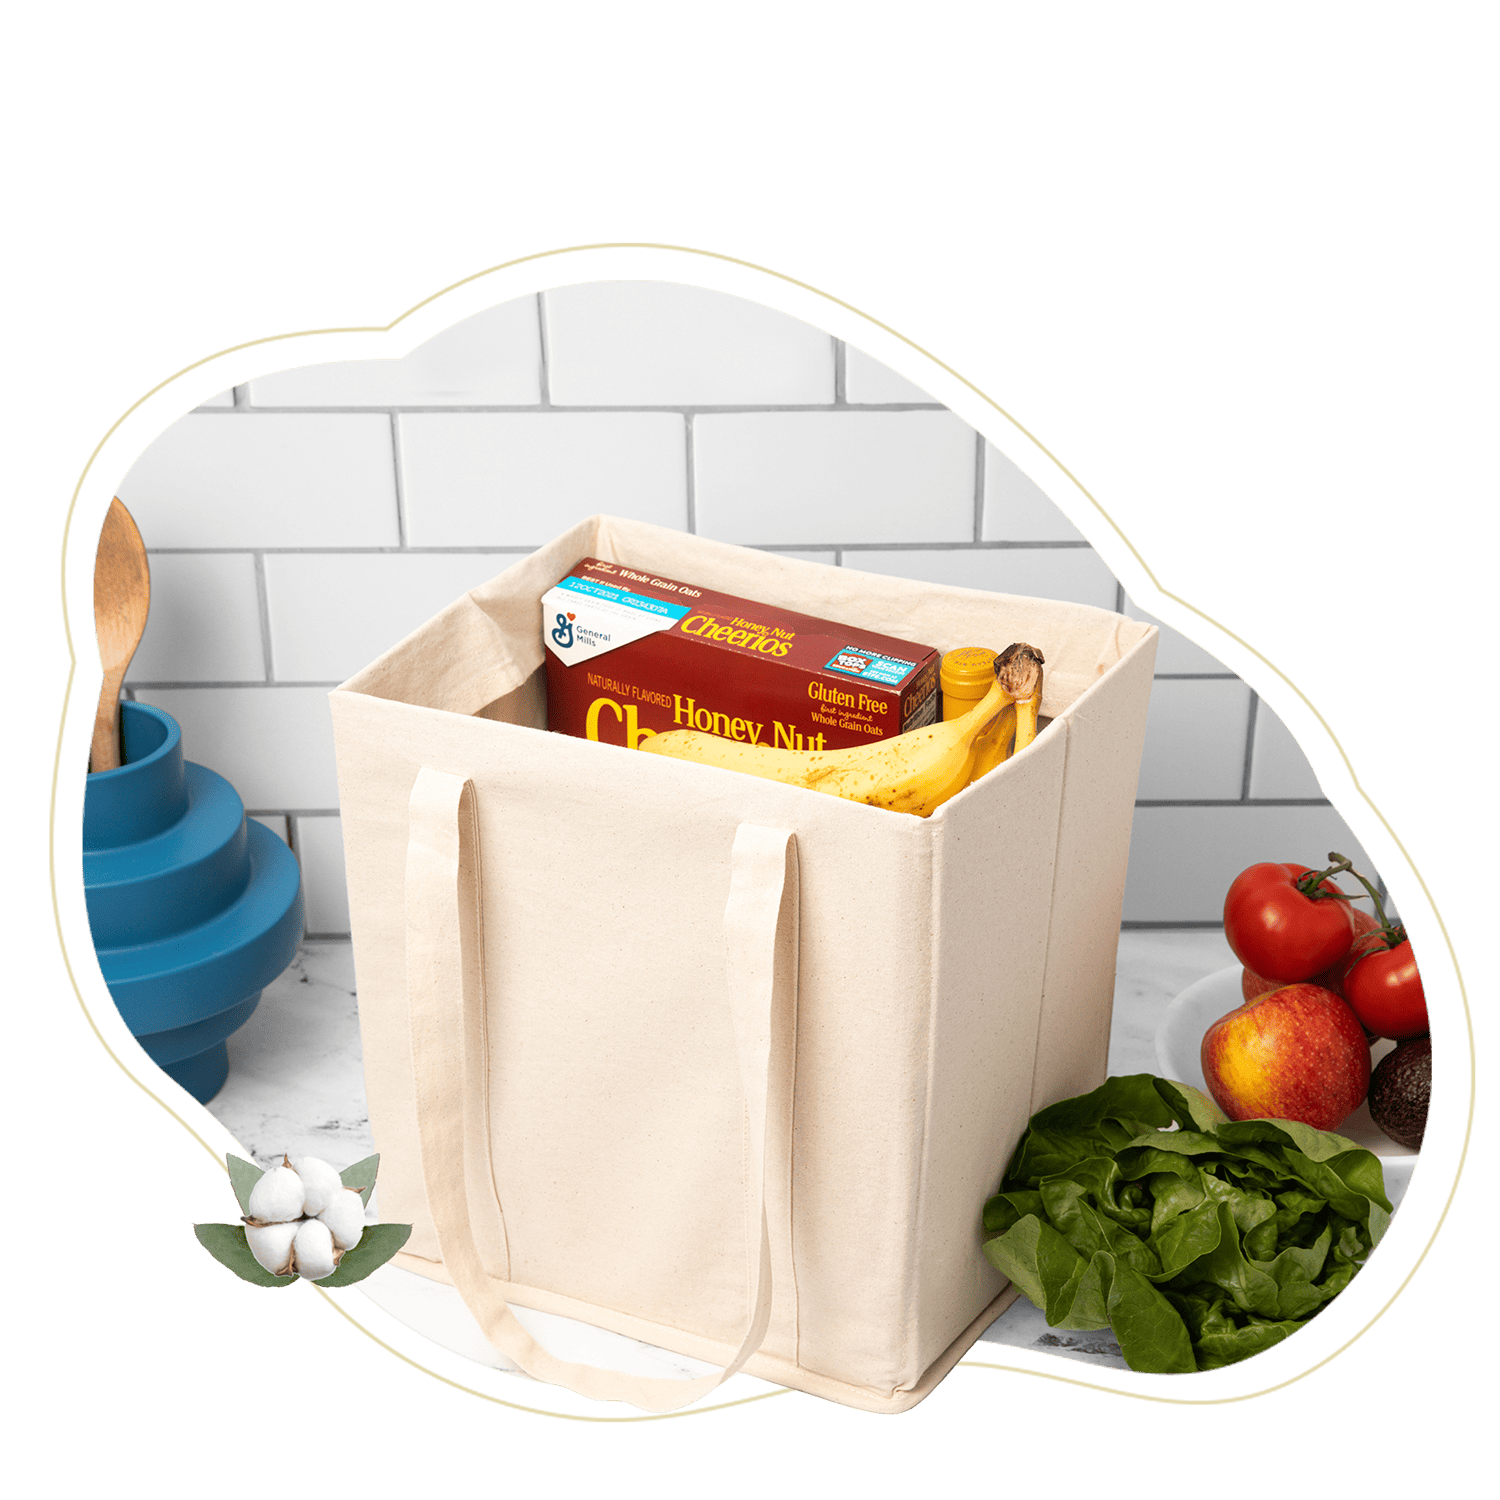 Collapsible Grocery Shopping Bags - Foldable and Heavy Duty Reusable Shopping Bags for Groceries - 100% Biodegradable - Easy to Store & Carry (3 Bags)